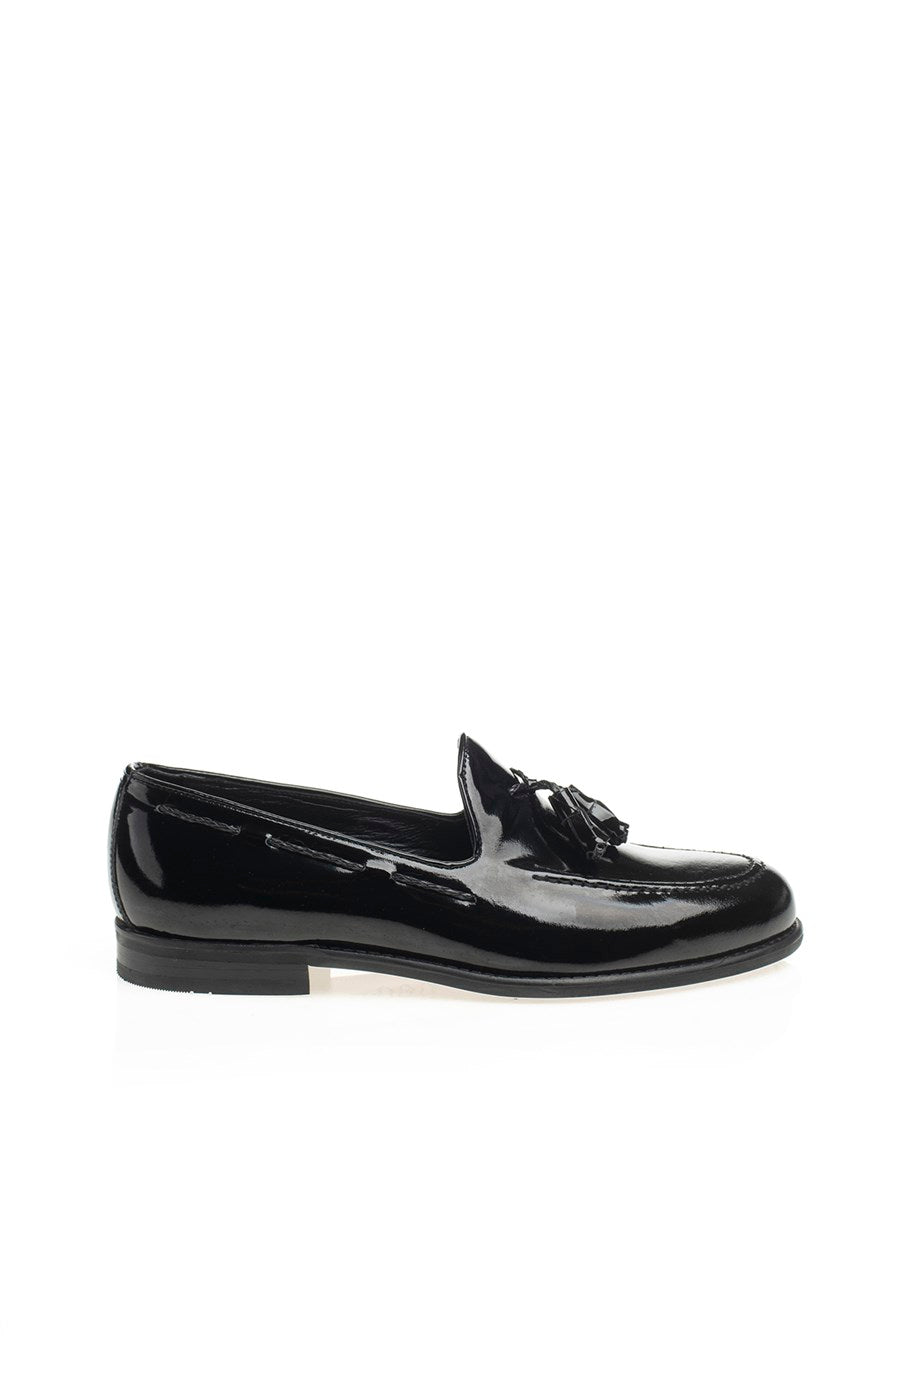 Inner Outer Genuine Patent Leather Shoes - MENSTYLEWITH